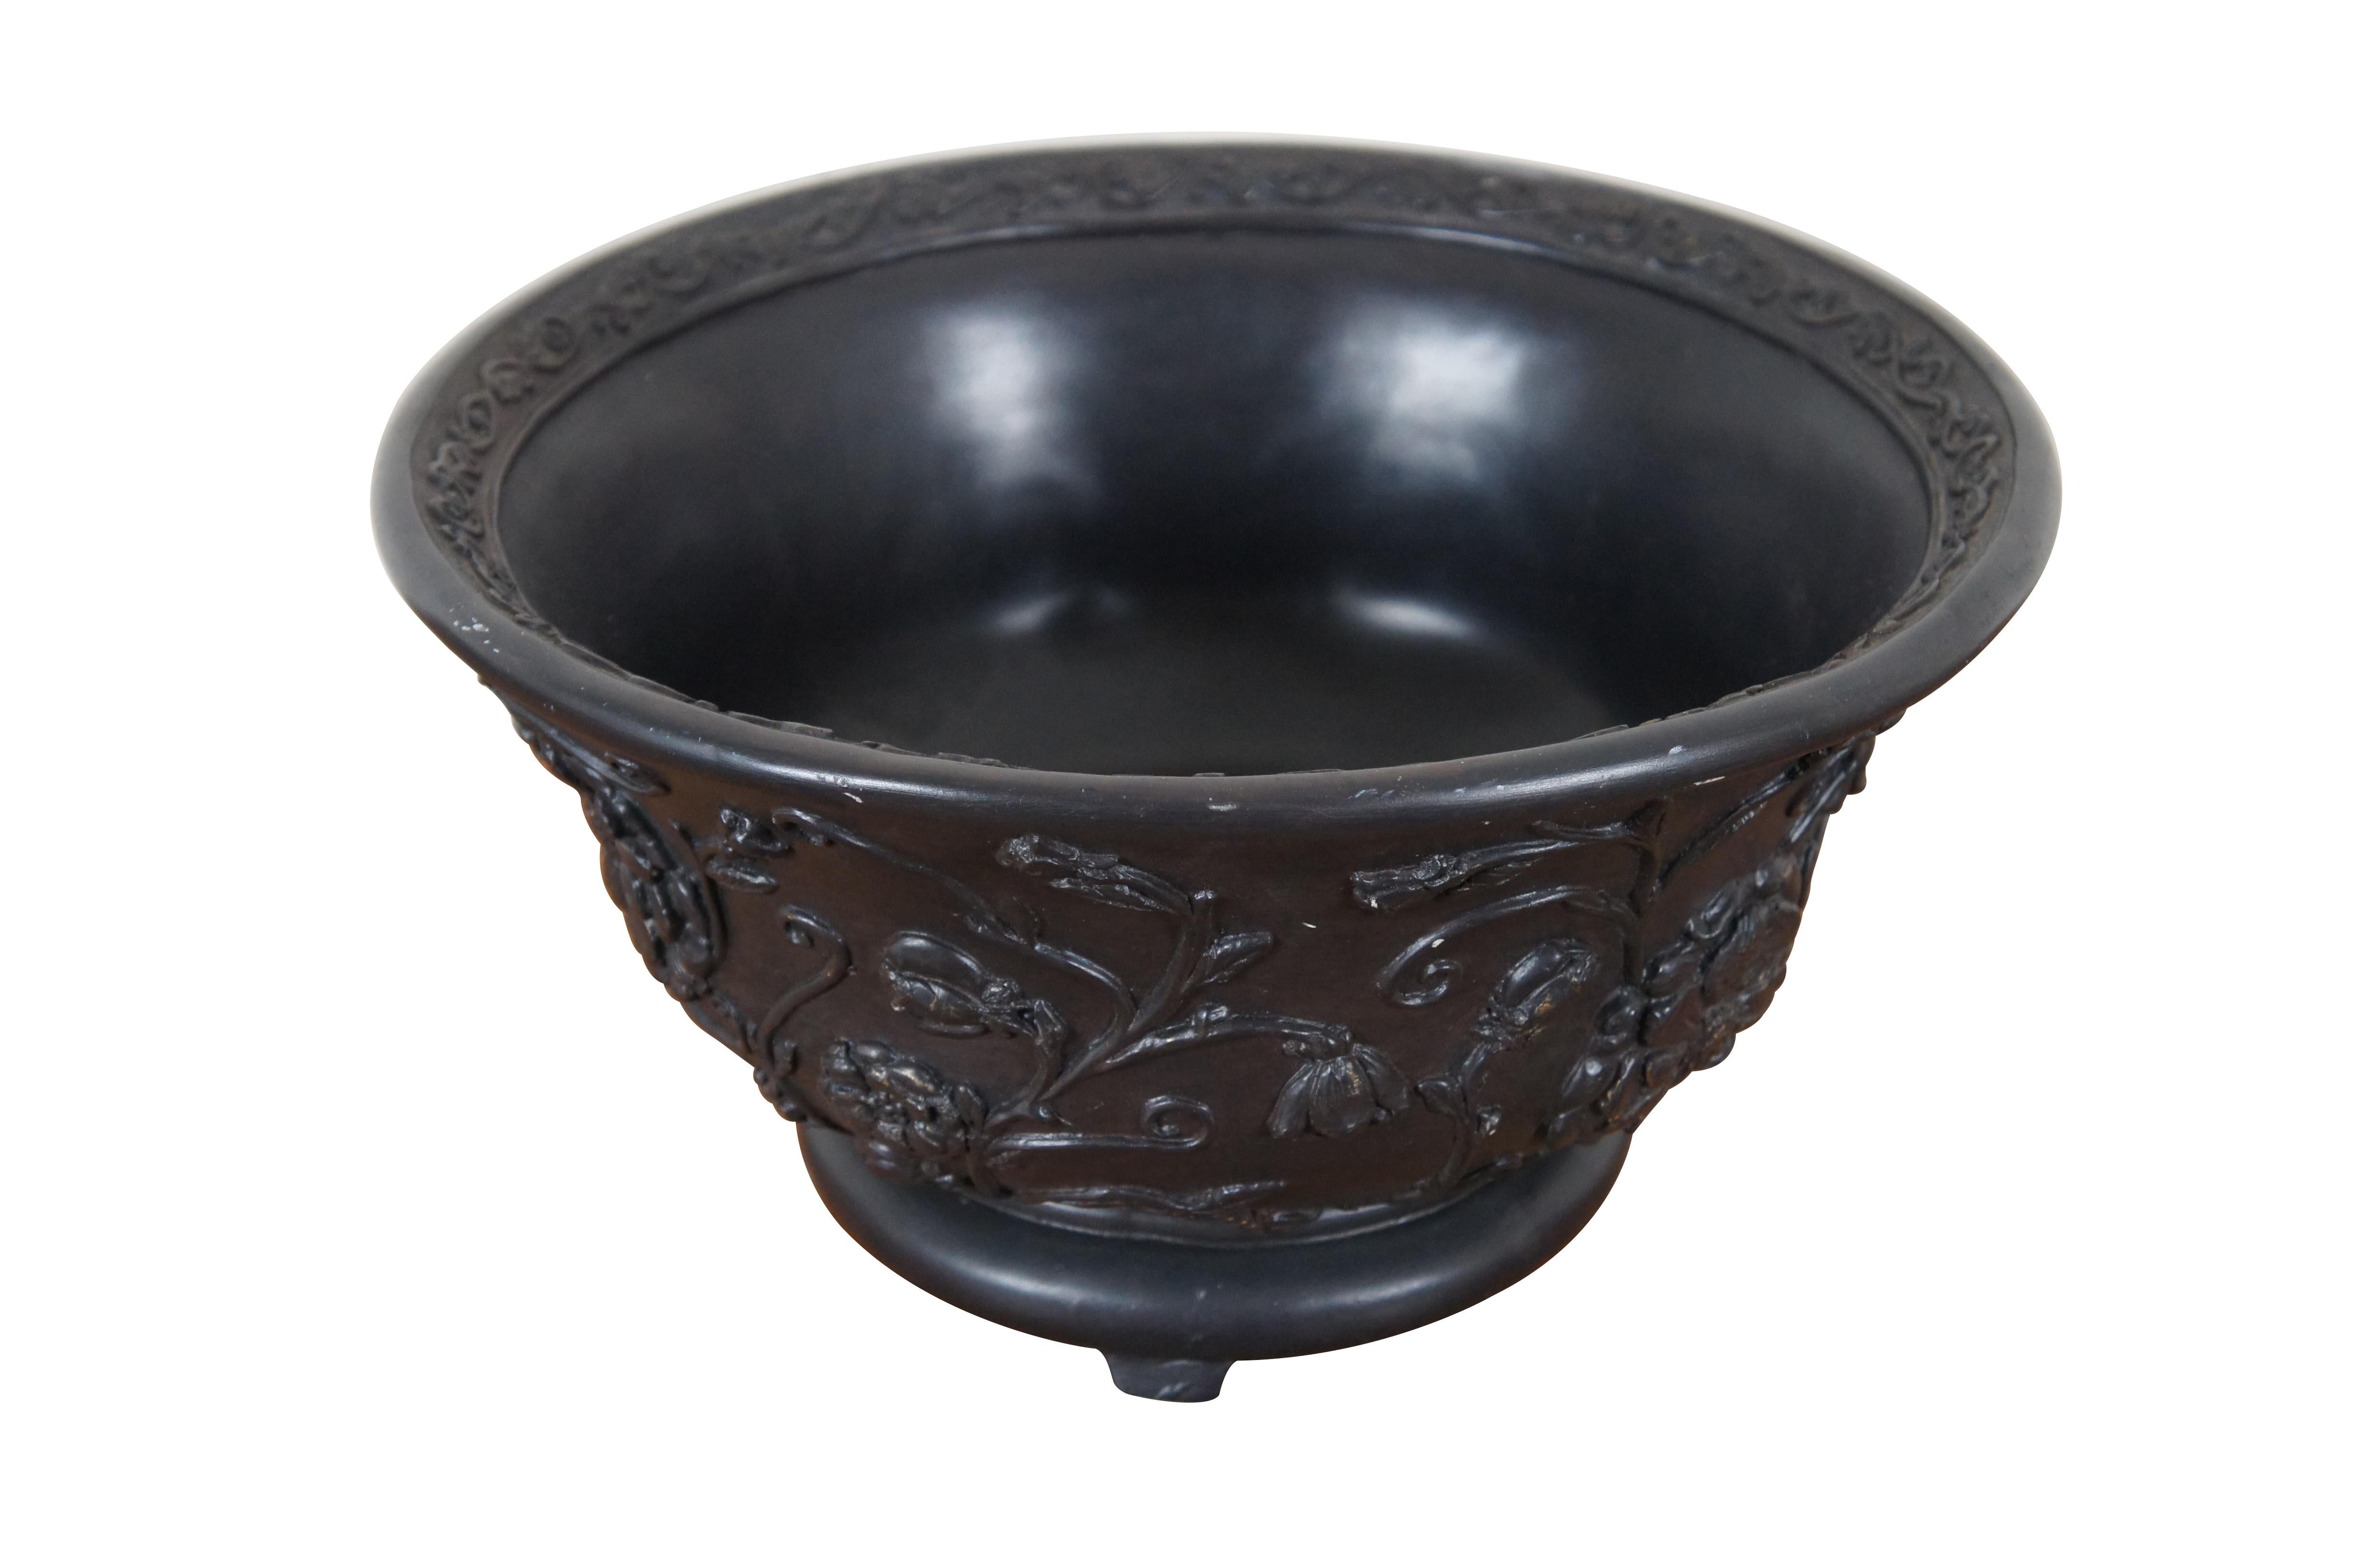 A rare Austin Productions Centerpiece, Jardinière or Bowl.  Features a black finish with low relief floral and chrysanthemum design.  The bowl is signified by a flared mouth with detailed rim and chrysanthemum at the center of the base.  The pot has